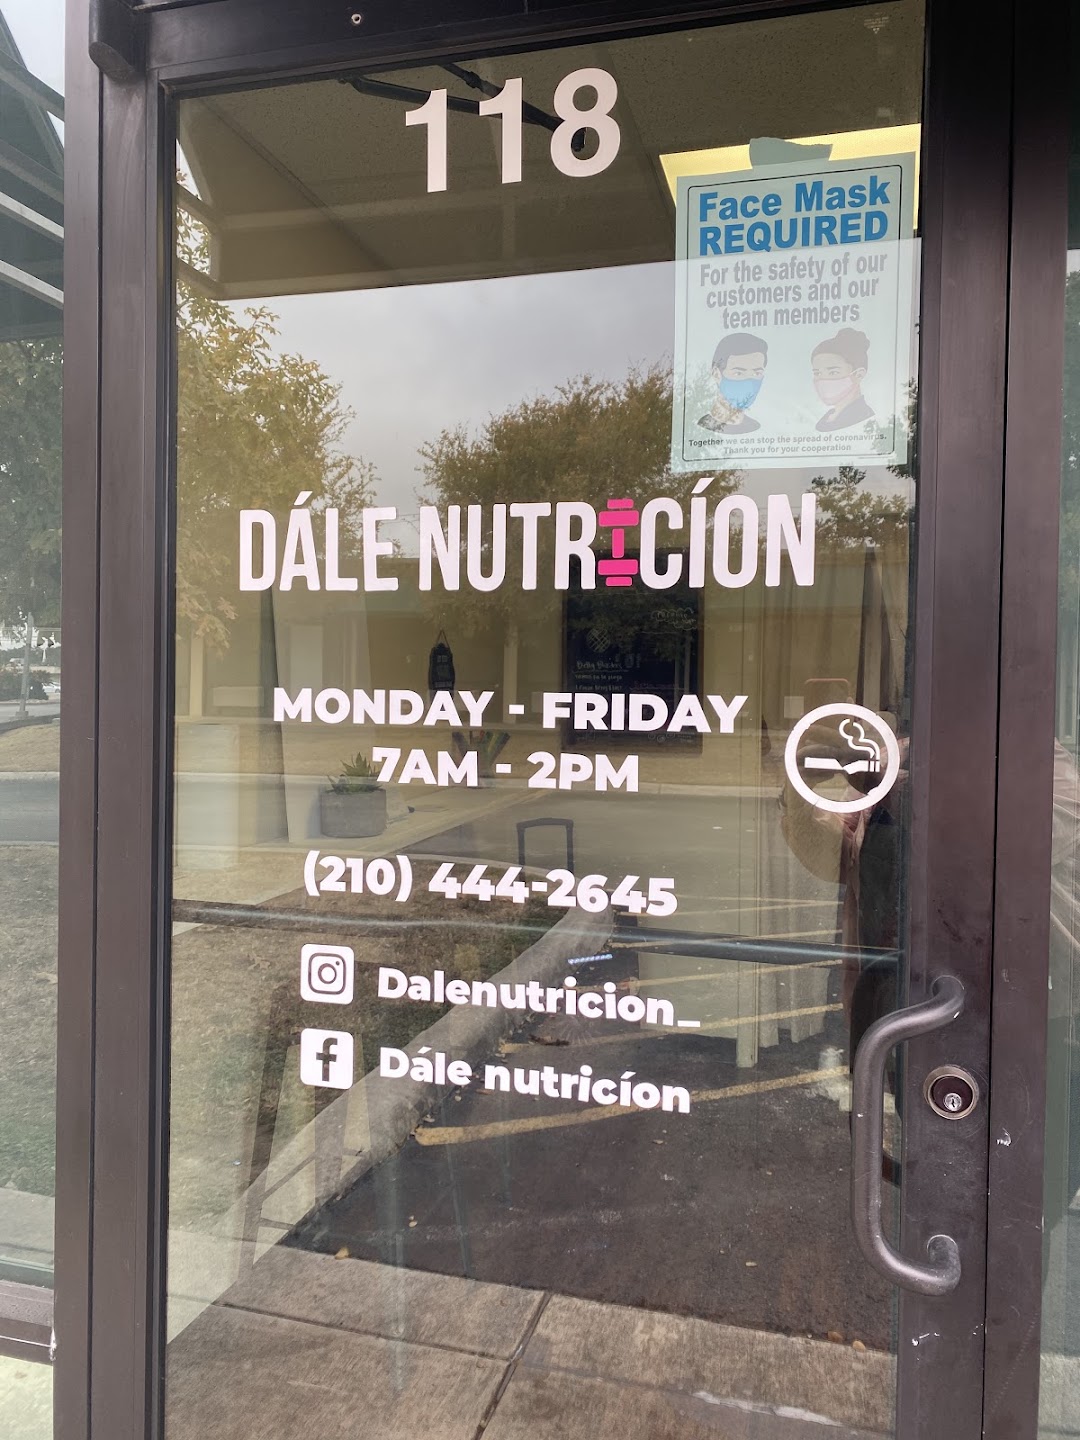 Dle Nutricon